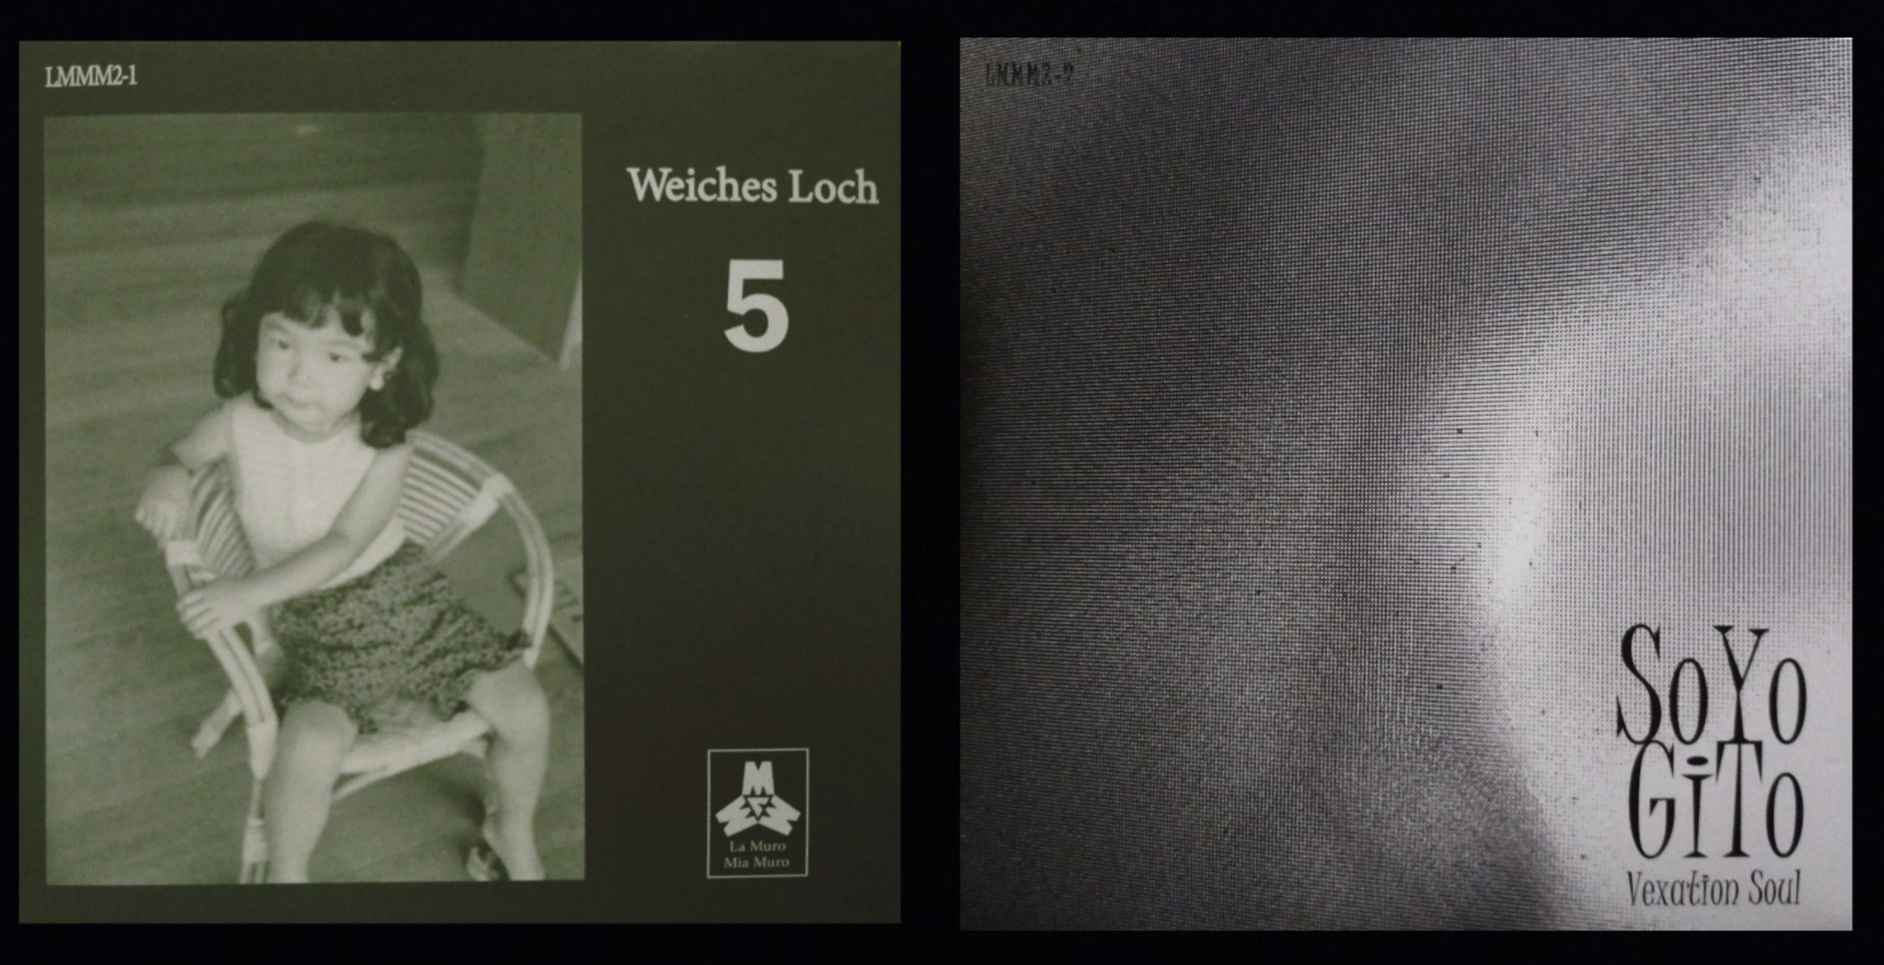 WEICHES LOCH / VEAXATION SOUL : 5 / SOYOGITO - Click Image to Close